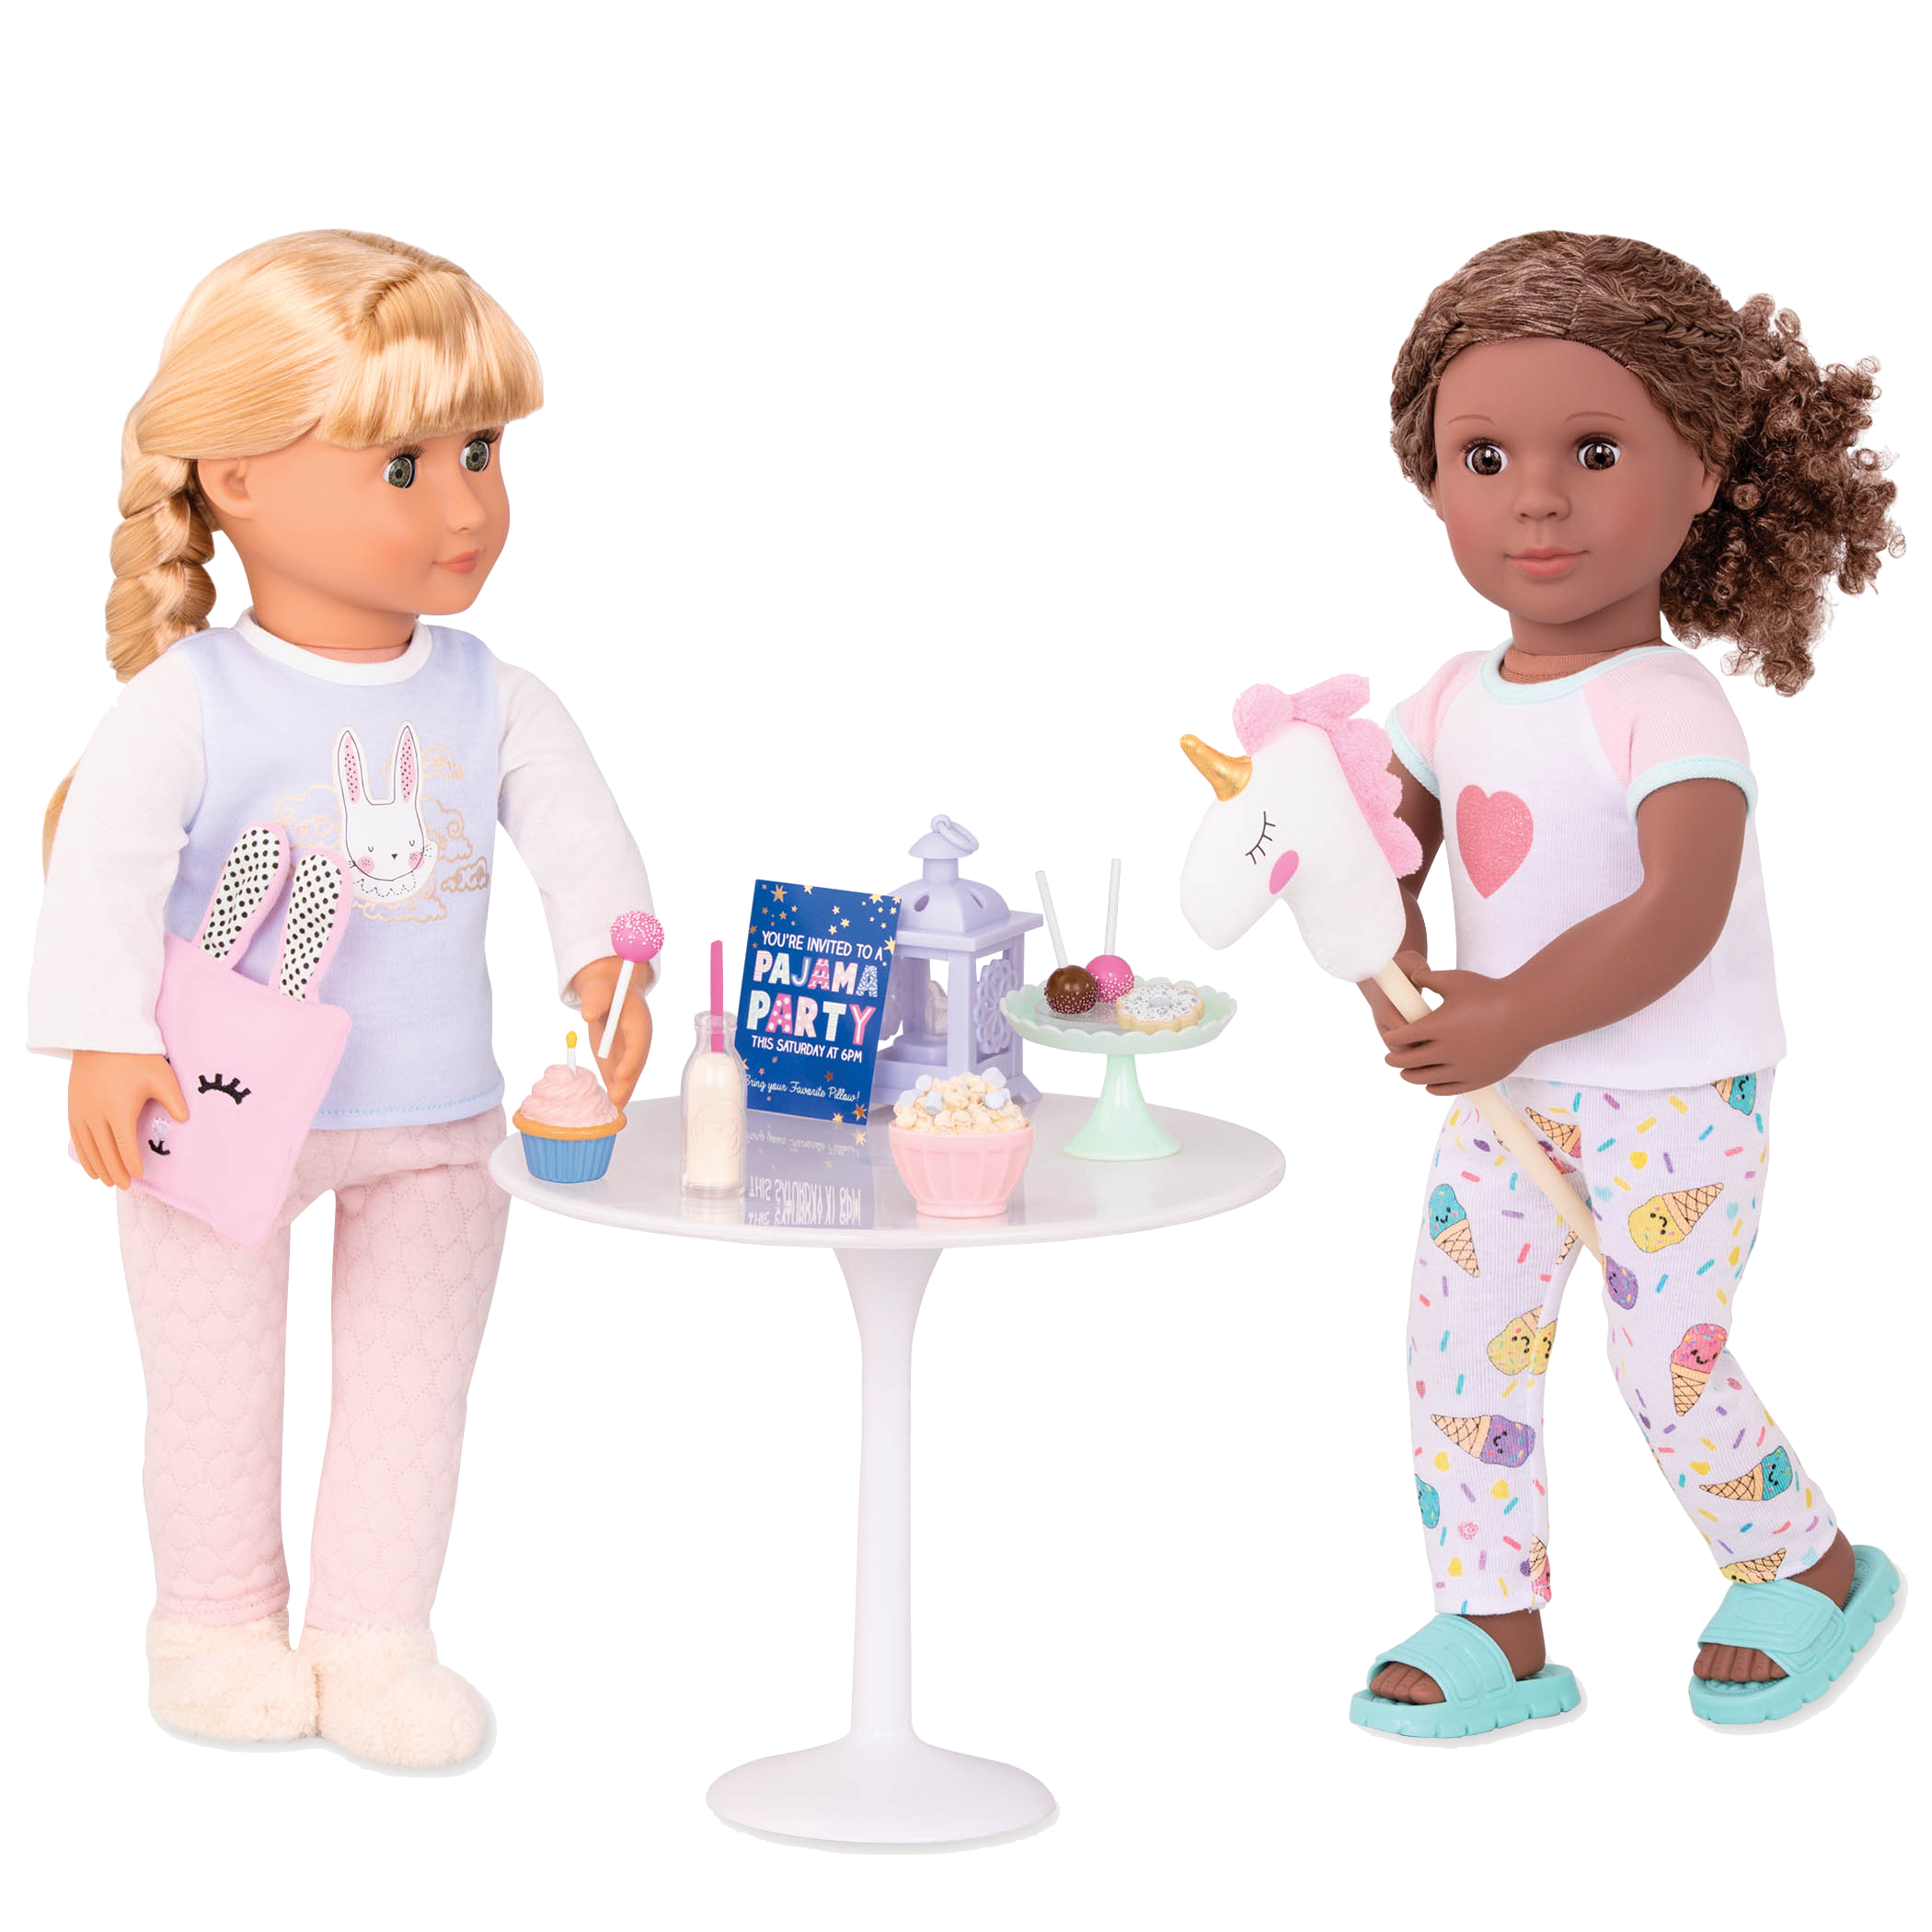 Jovie and Denelle having a sleepover party